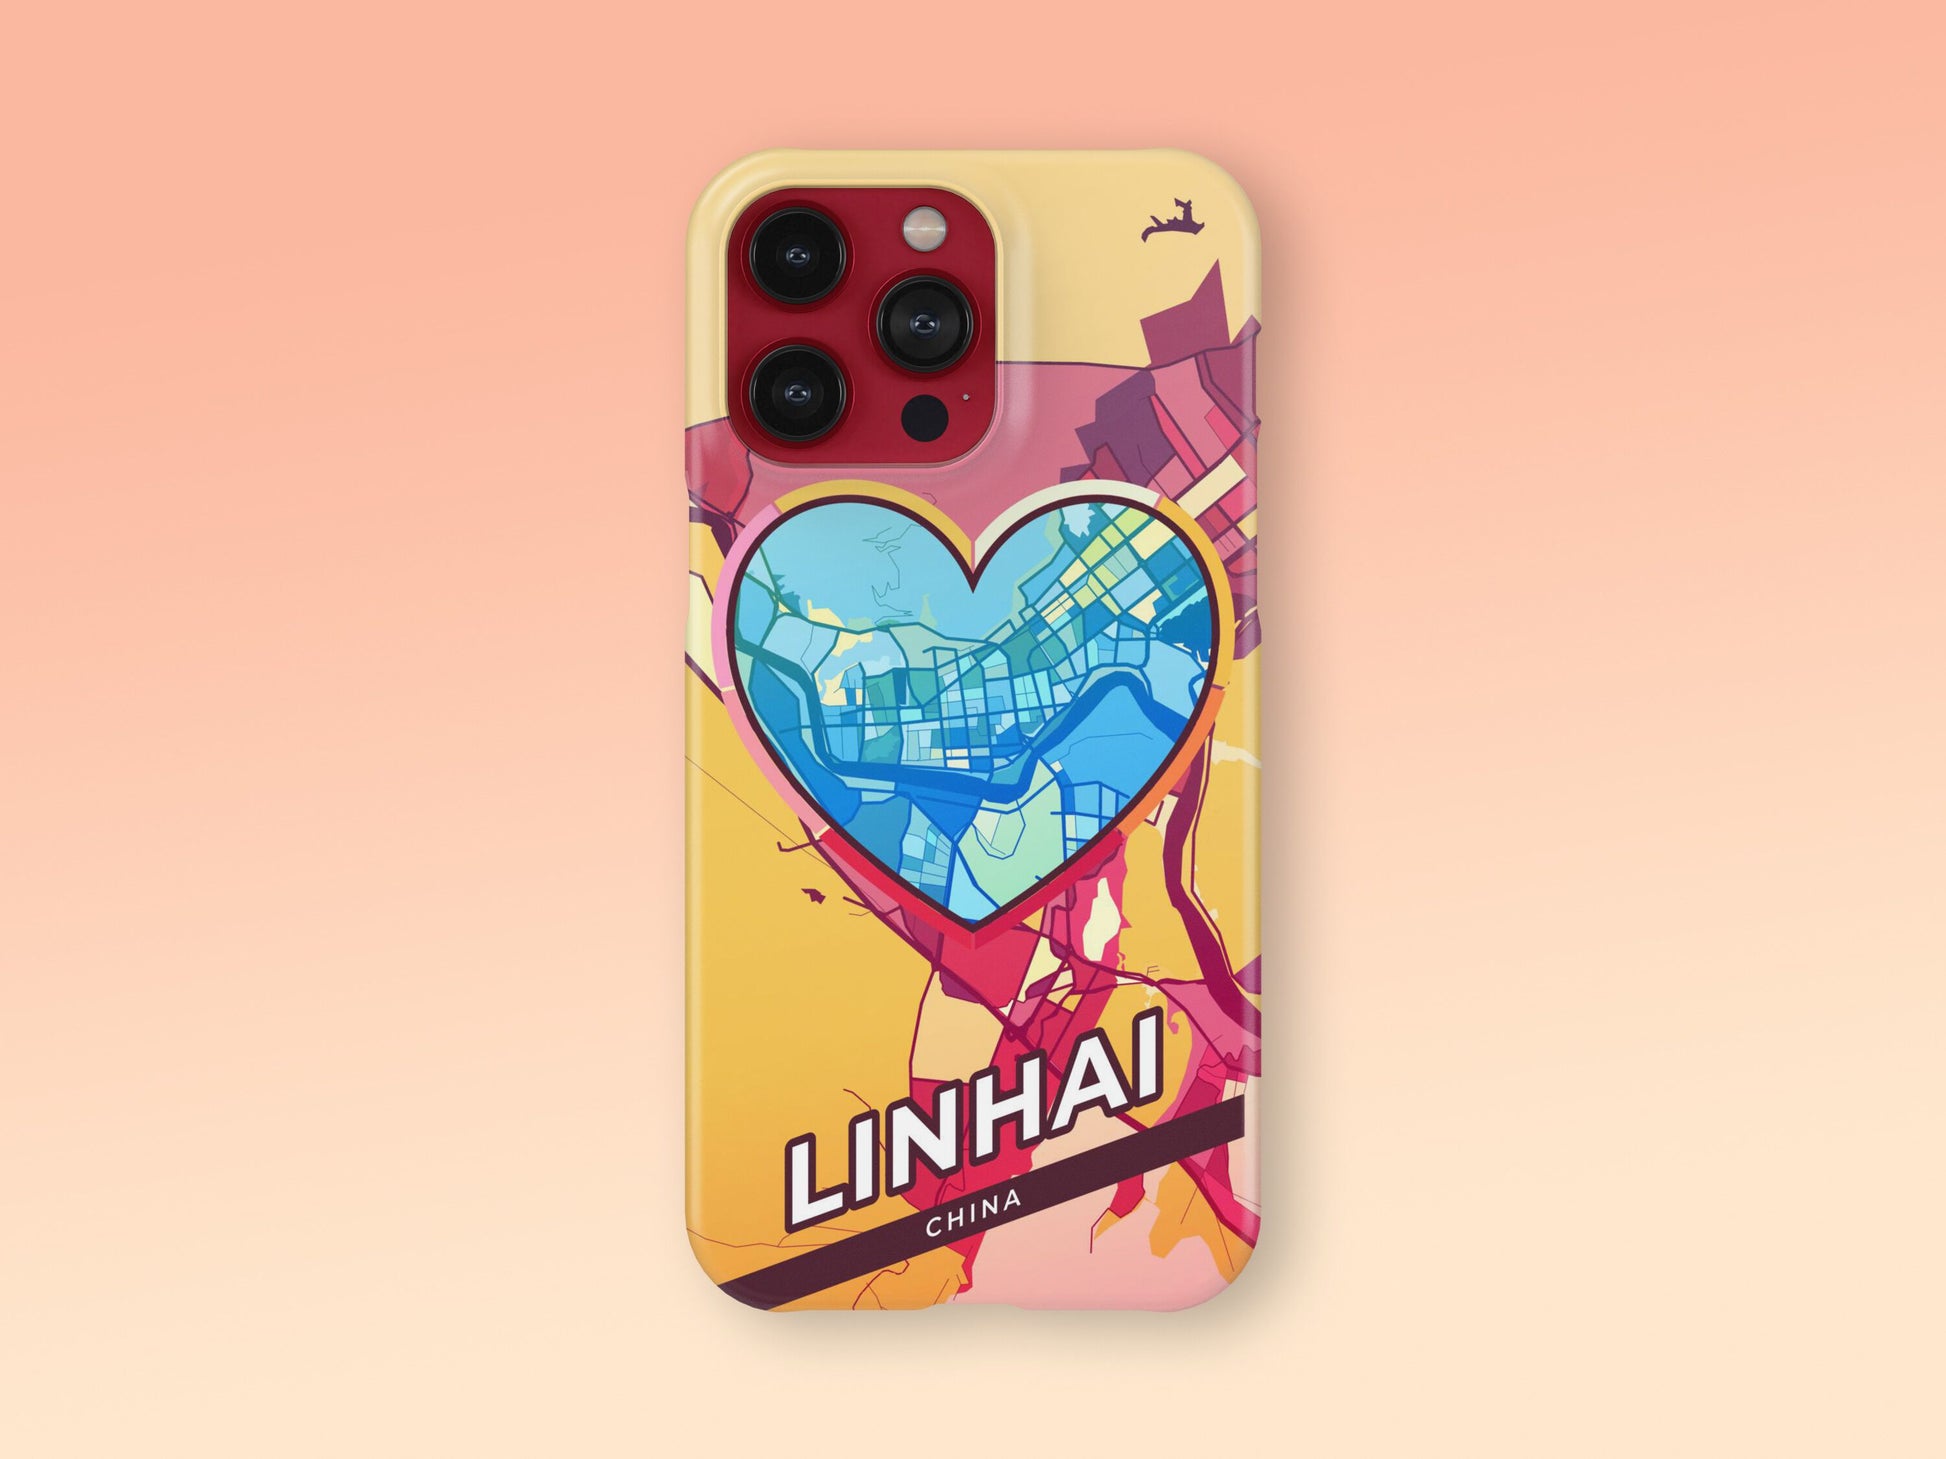 Linhai China slim phone case with colorful icon. Birthday, wedding or housewarming gift. Couple match cases. 2